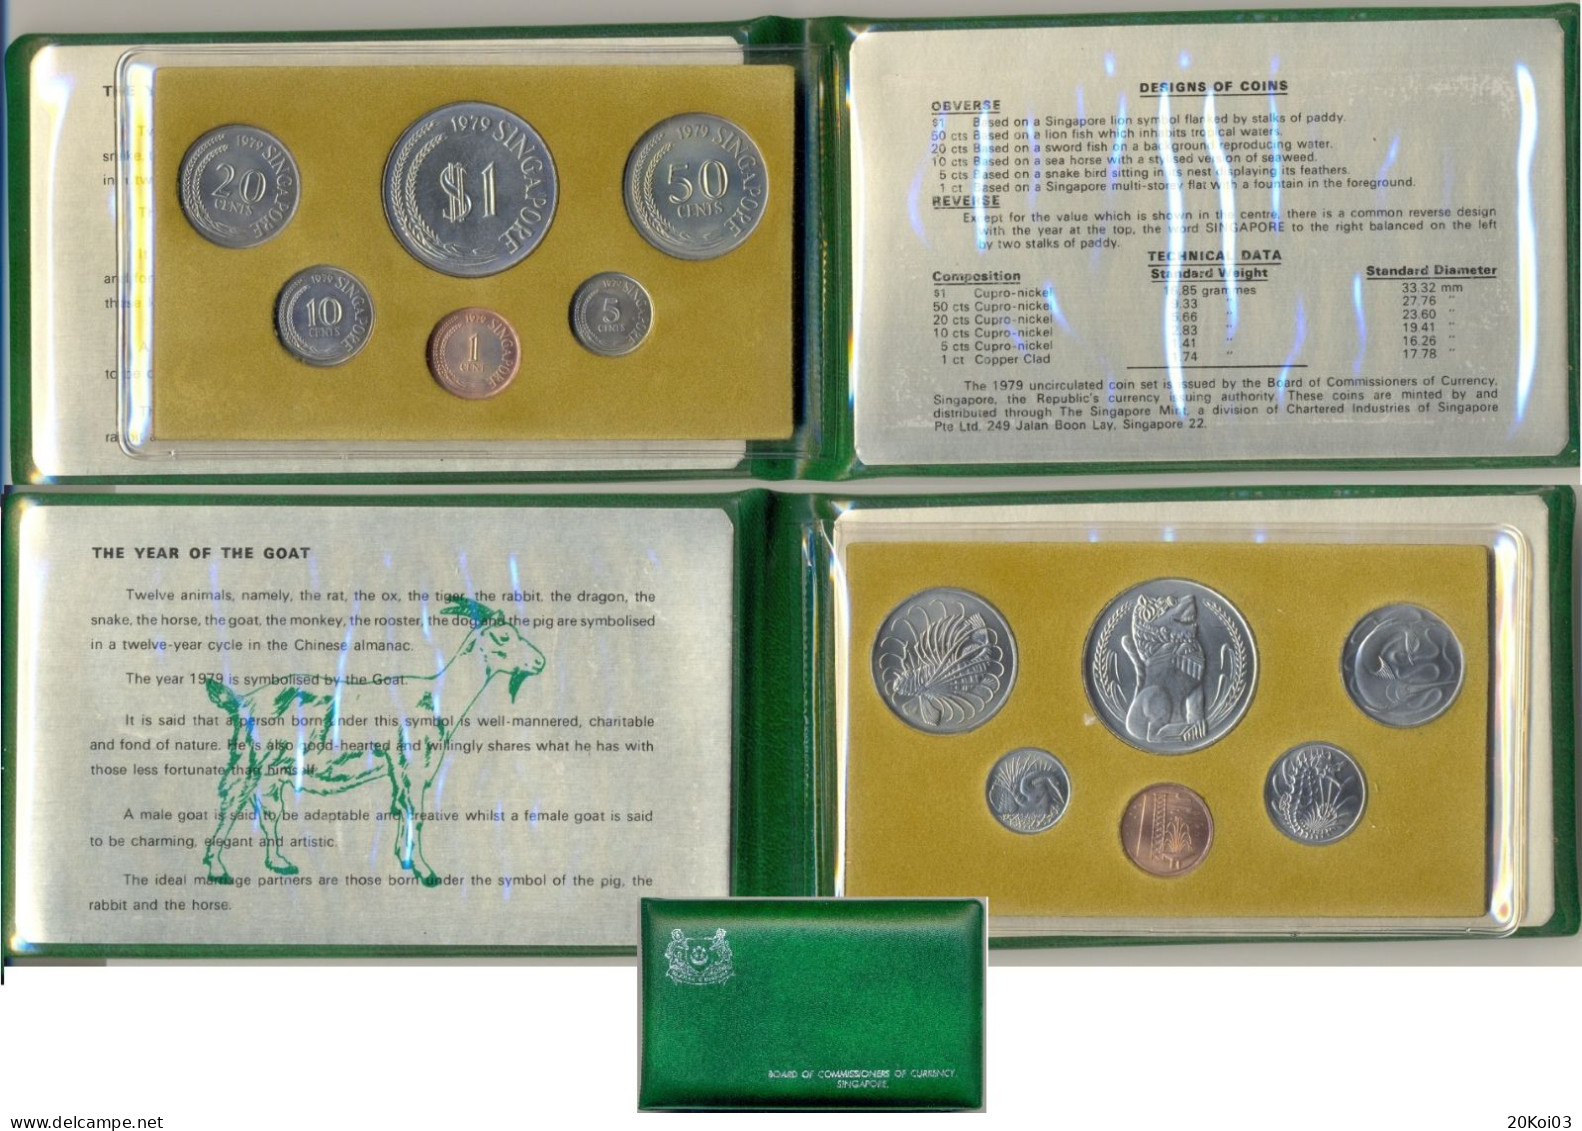 Singapore Coin Set Coins 1979 Uncirculated, The Year Of The Goat, Board Of Commissioners Of Currency_SUP - Singapore